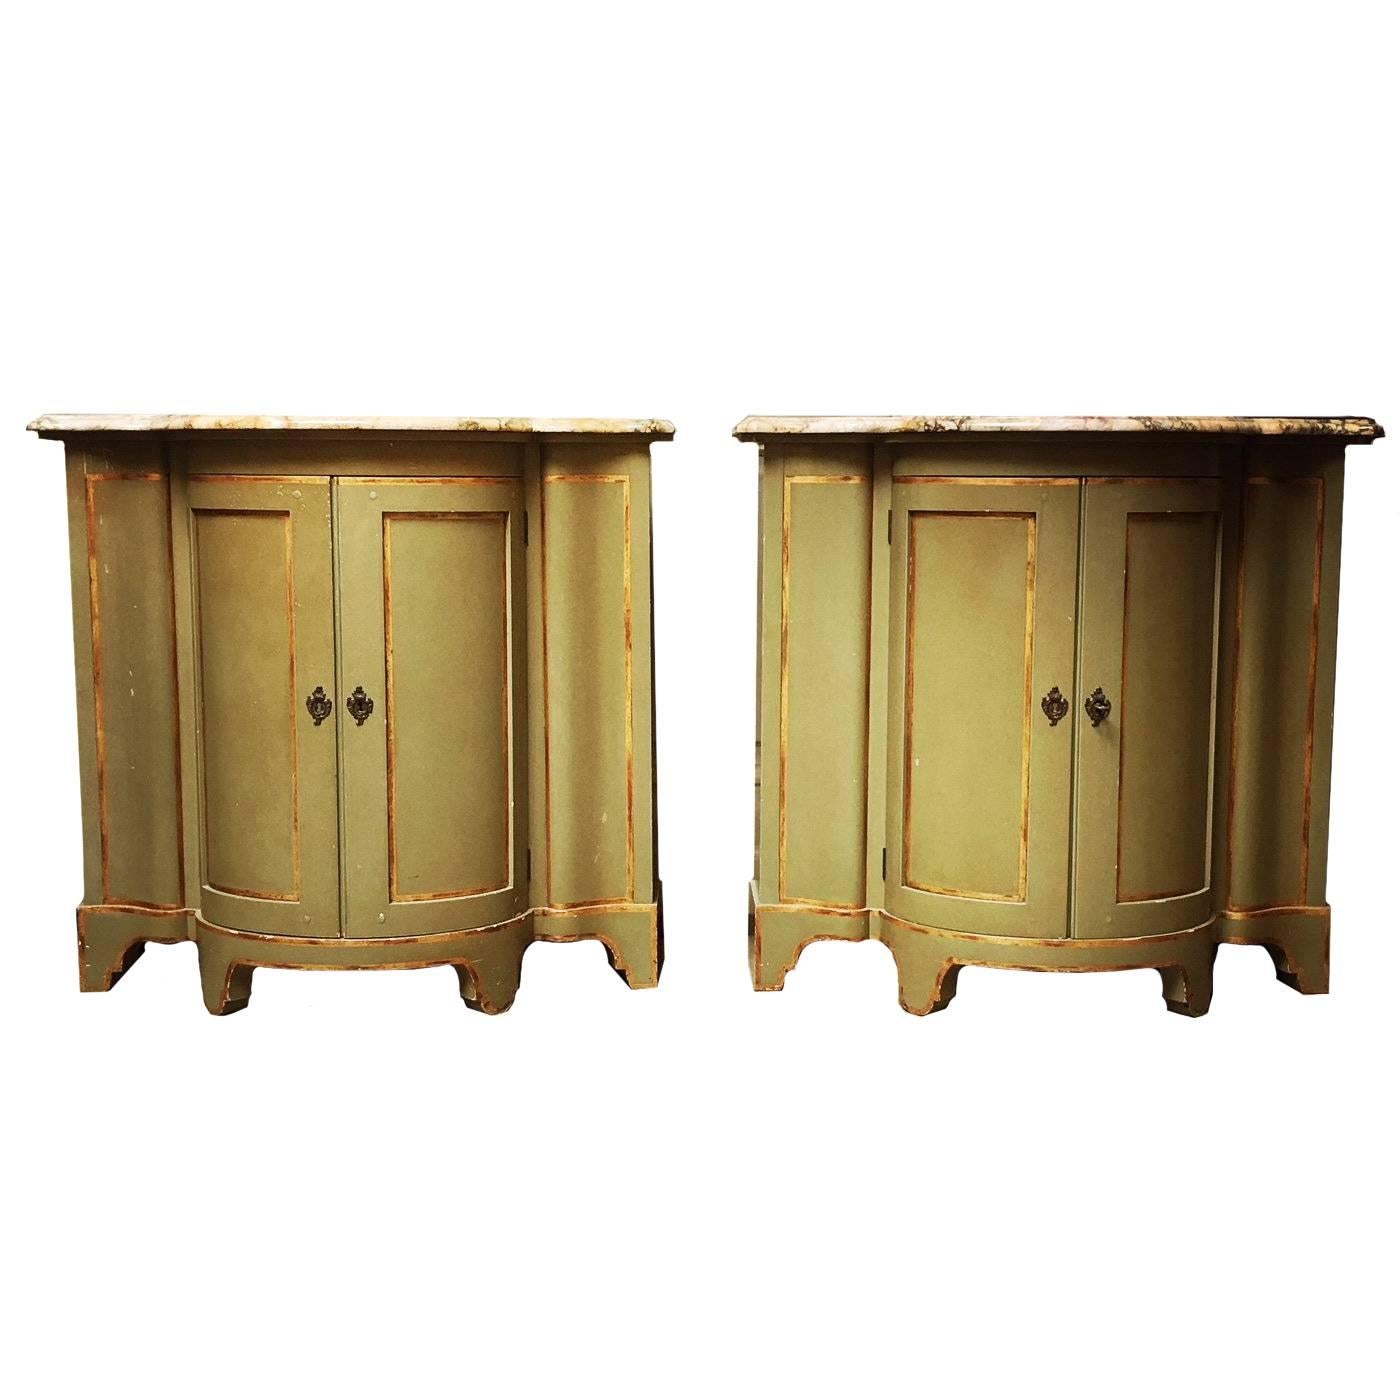 A Pair of Painted And Parcel Gilt Cabinets With Marble Tops